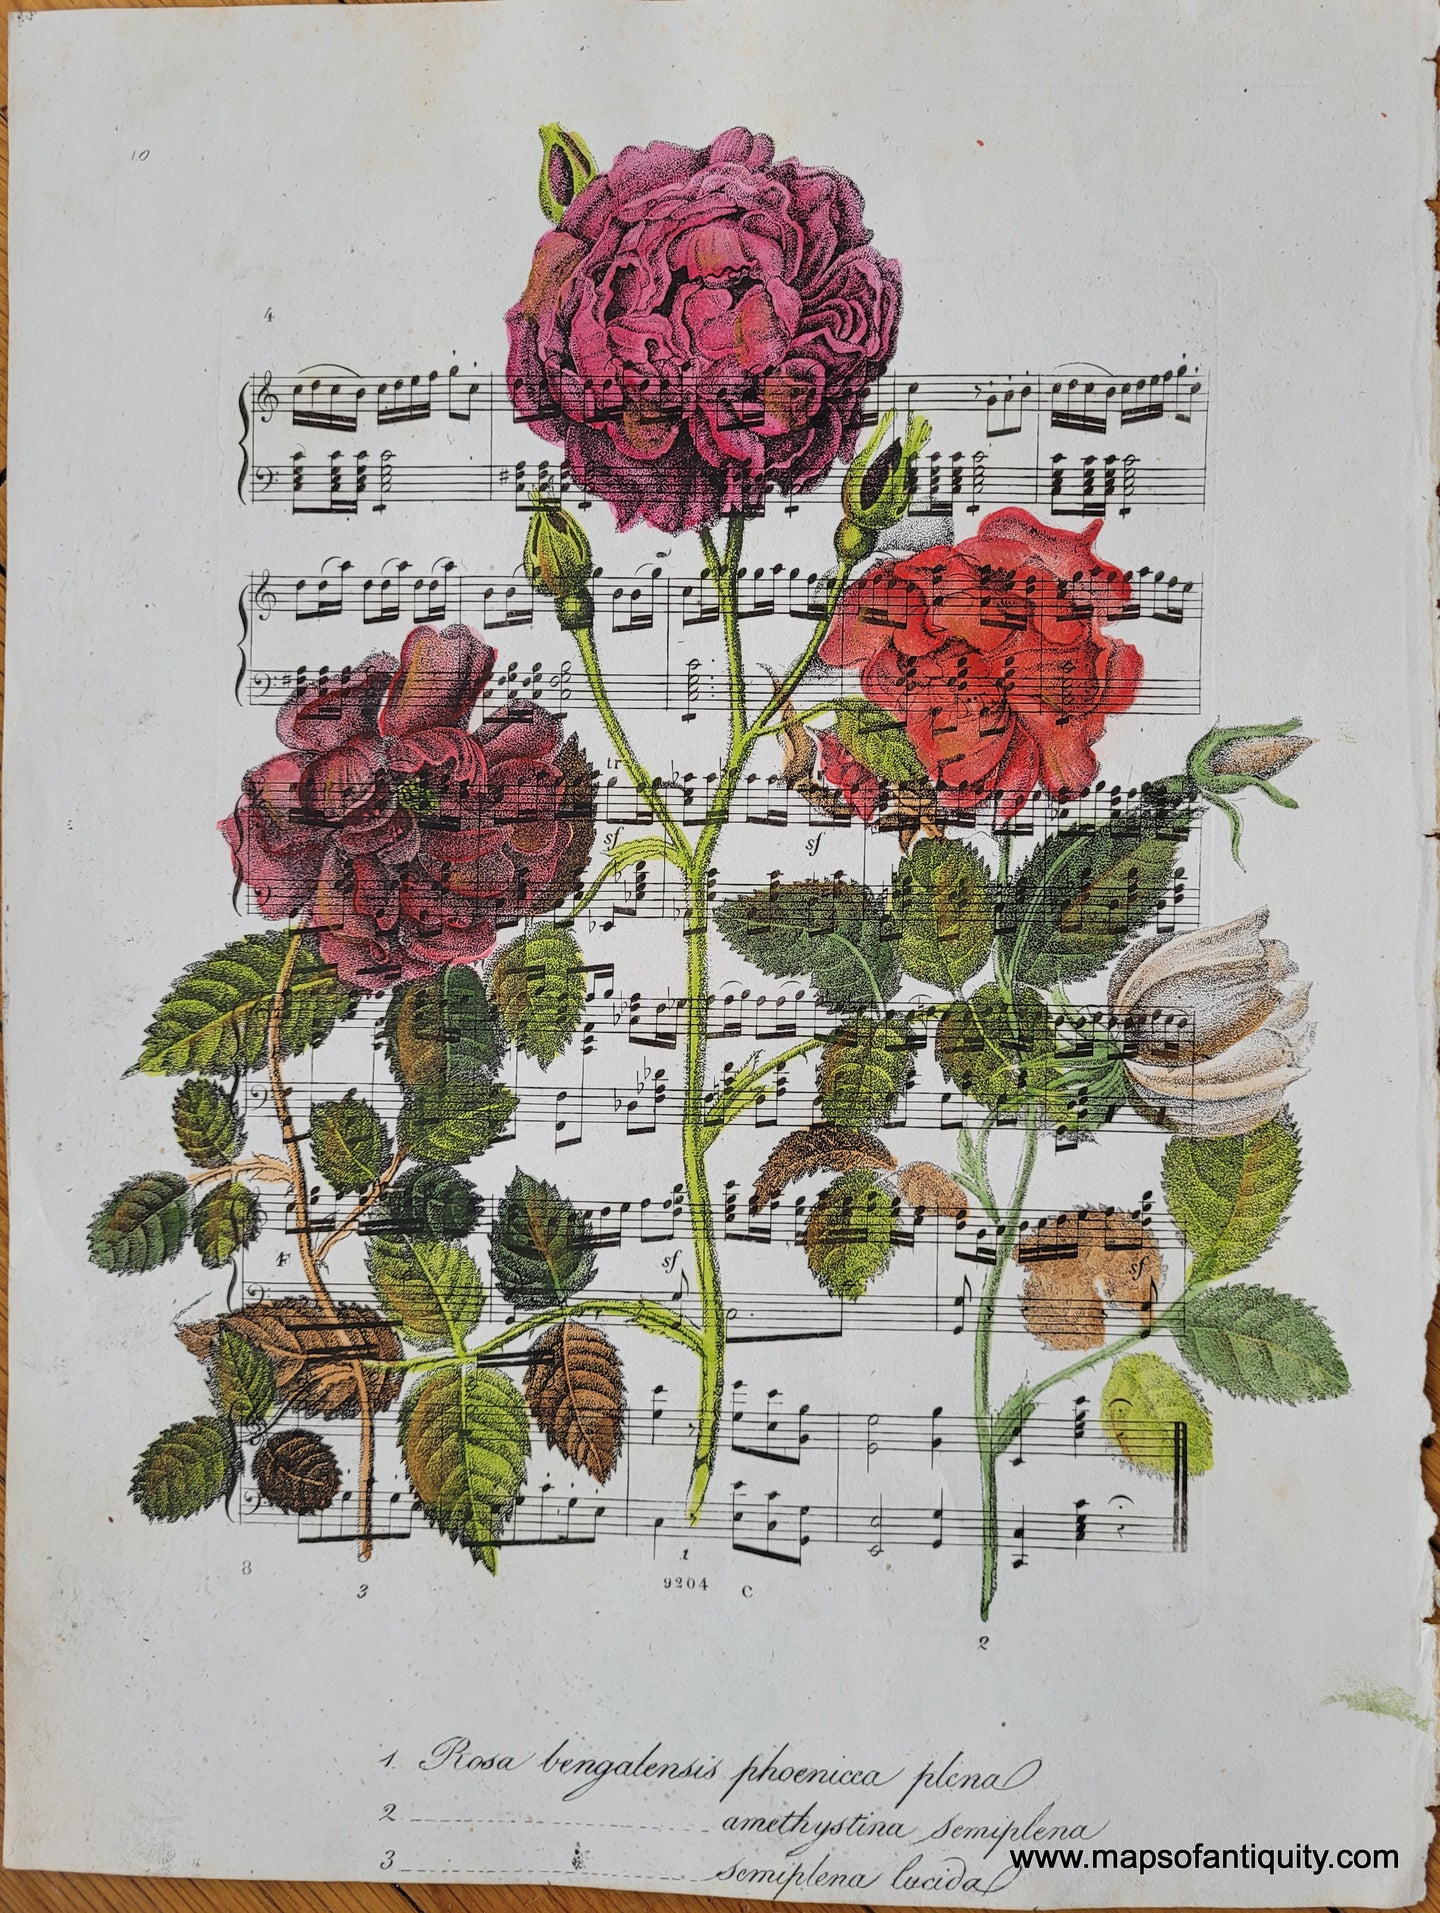 Specialty-Hand-Made-Reproduction-on-Antique-Paper-Rose-on-Sheet-Music--Reproduction-Maps-Of-Antiquity